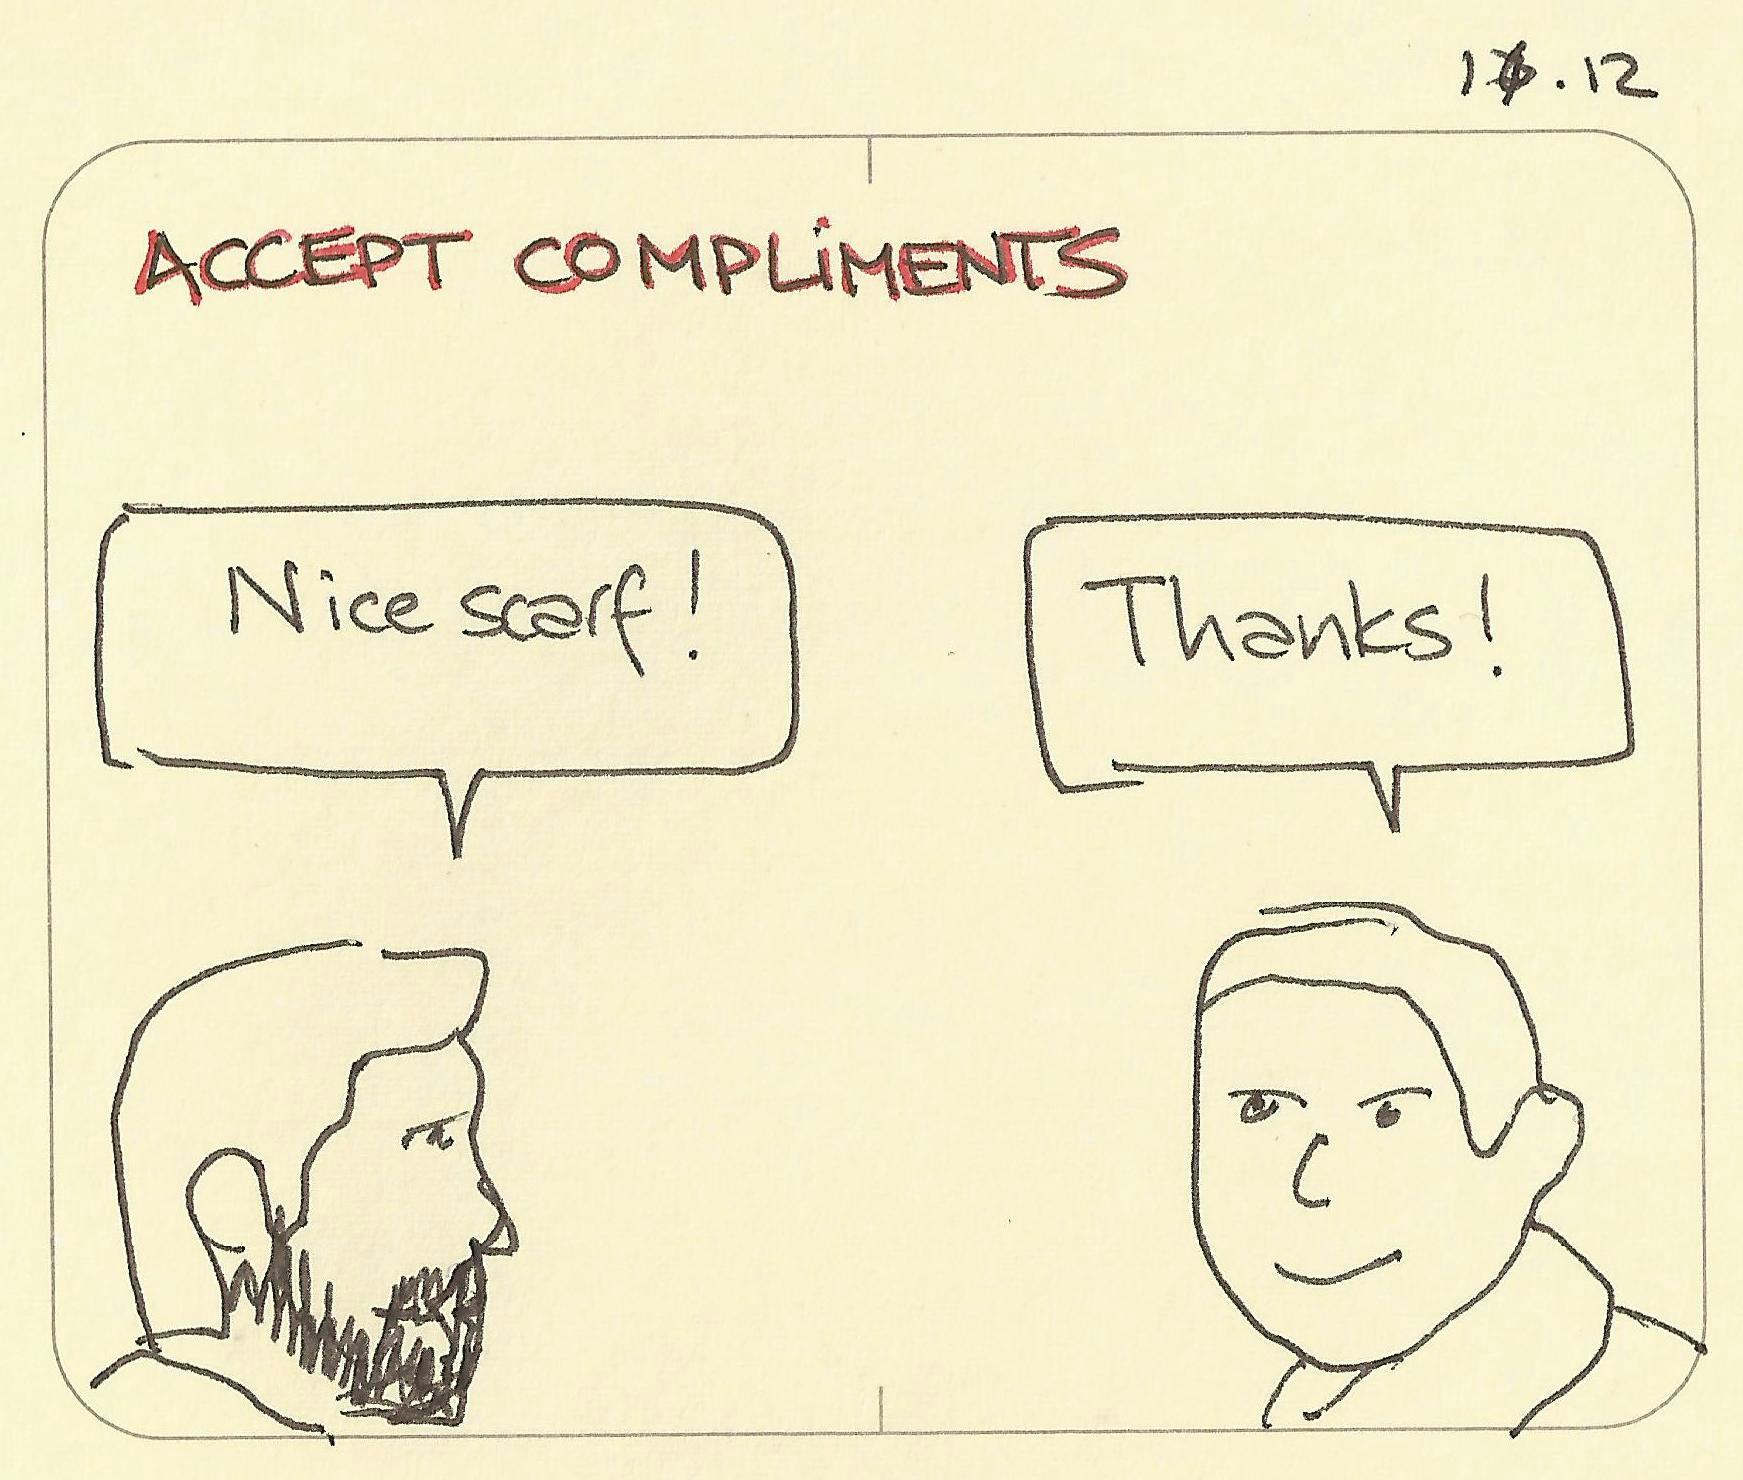 Accept compliments - Sketchplanations